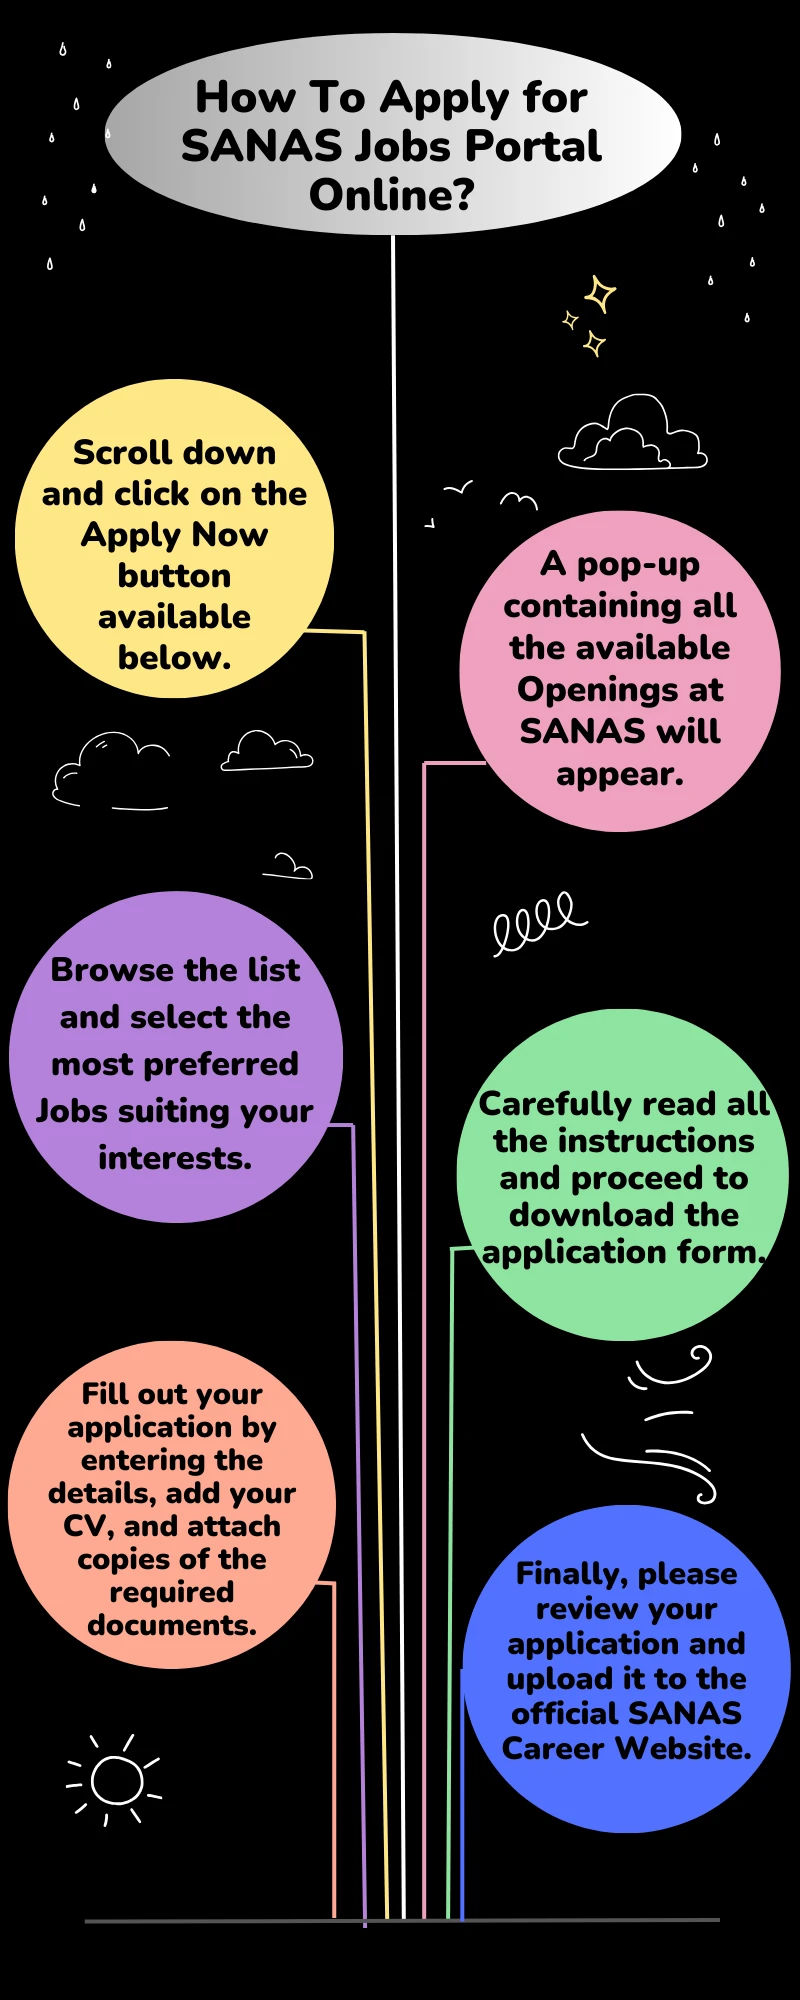 How To Apply for SANAS Jobs Portal Online?